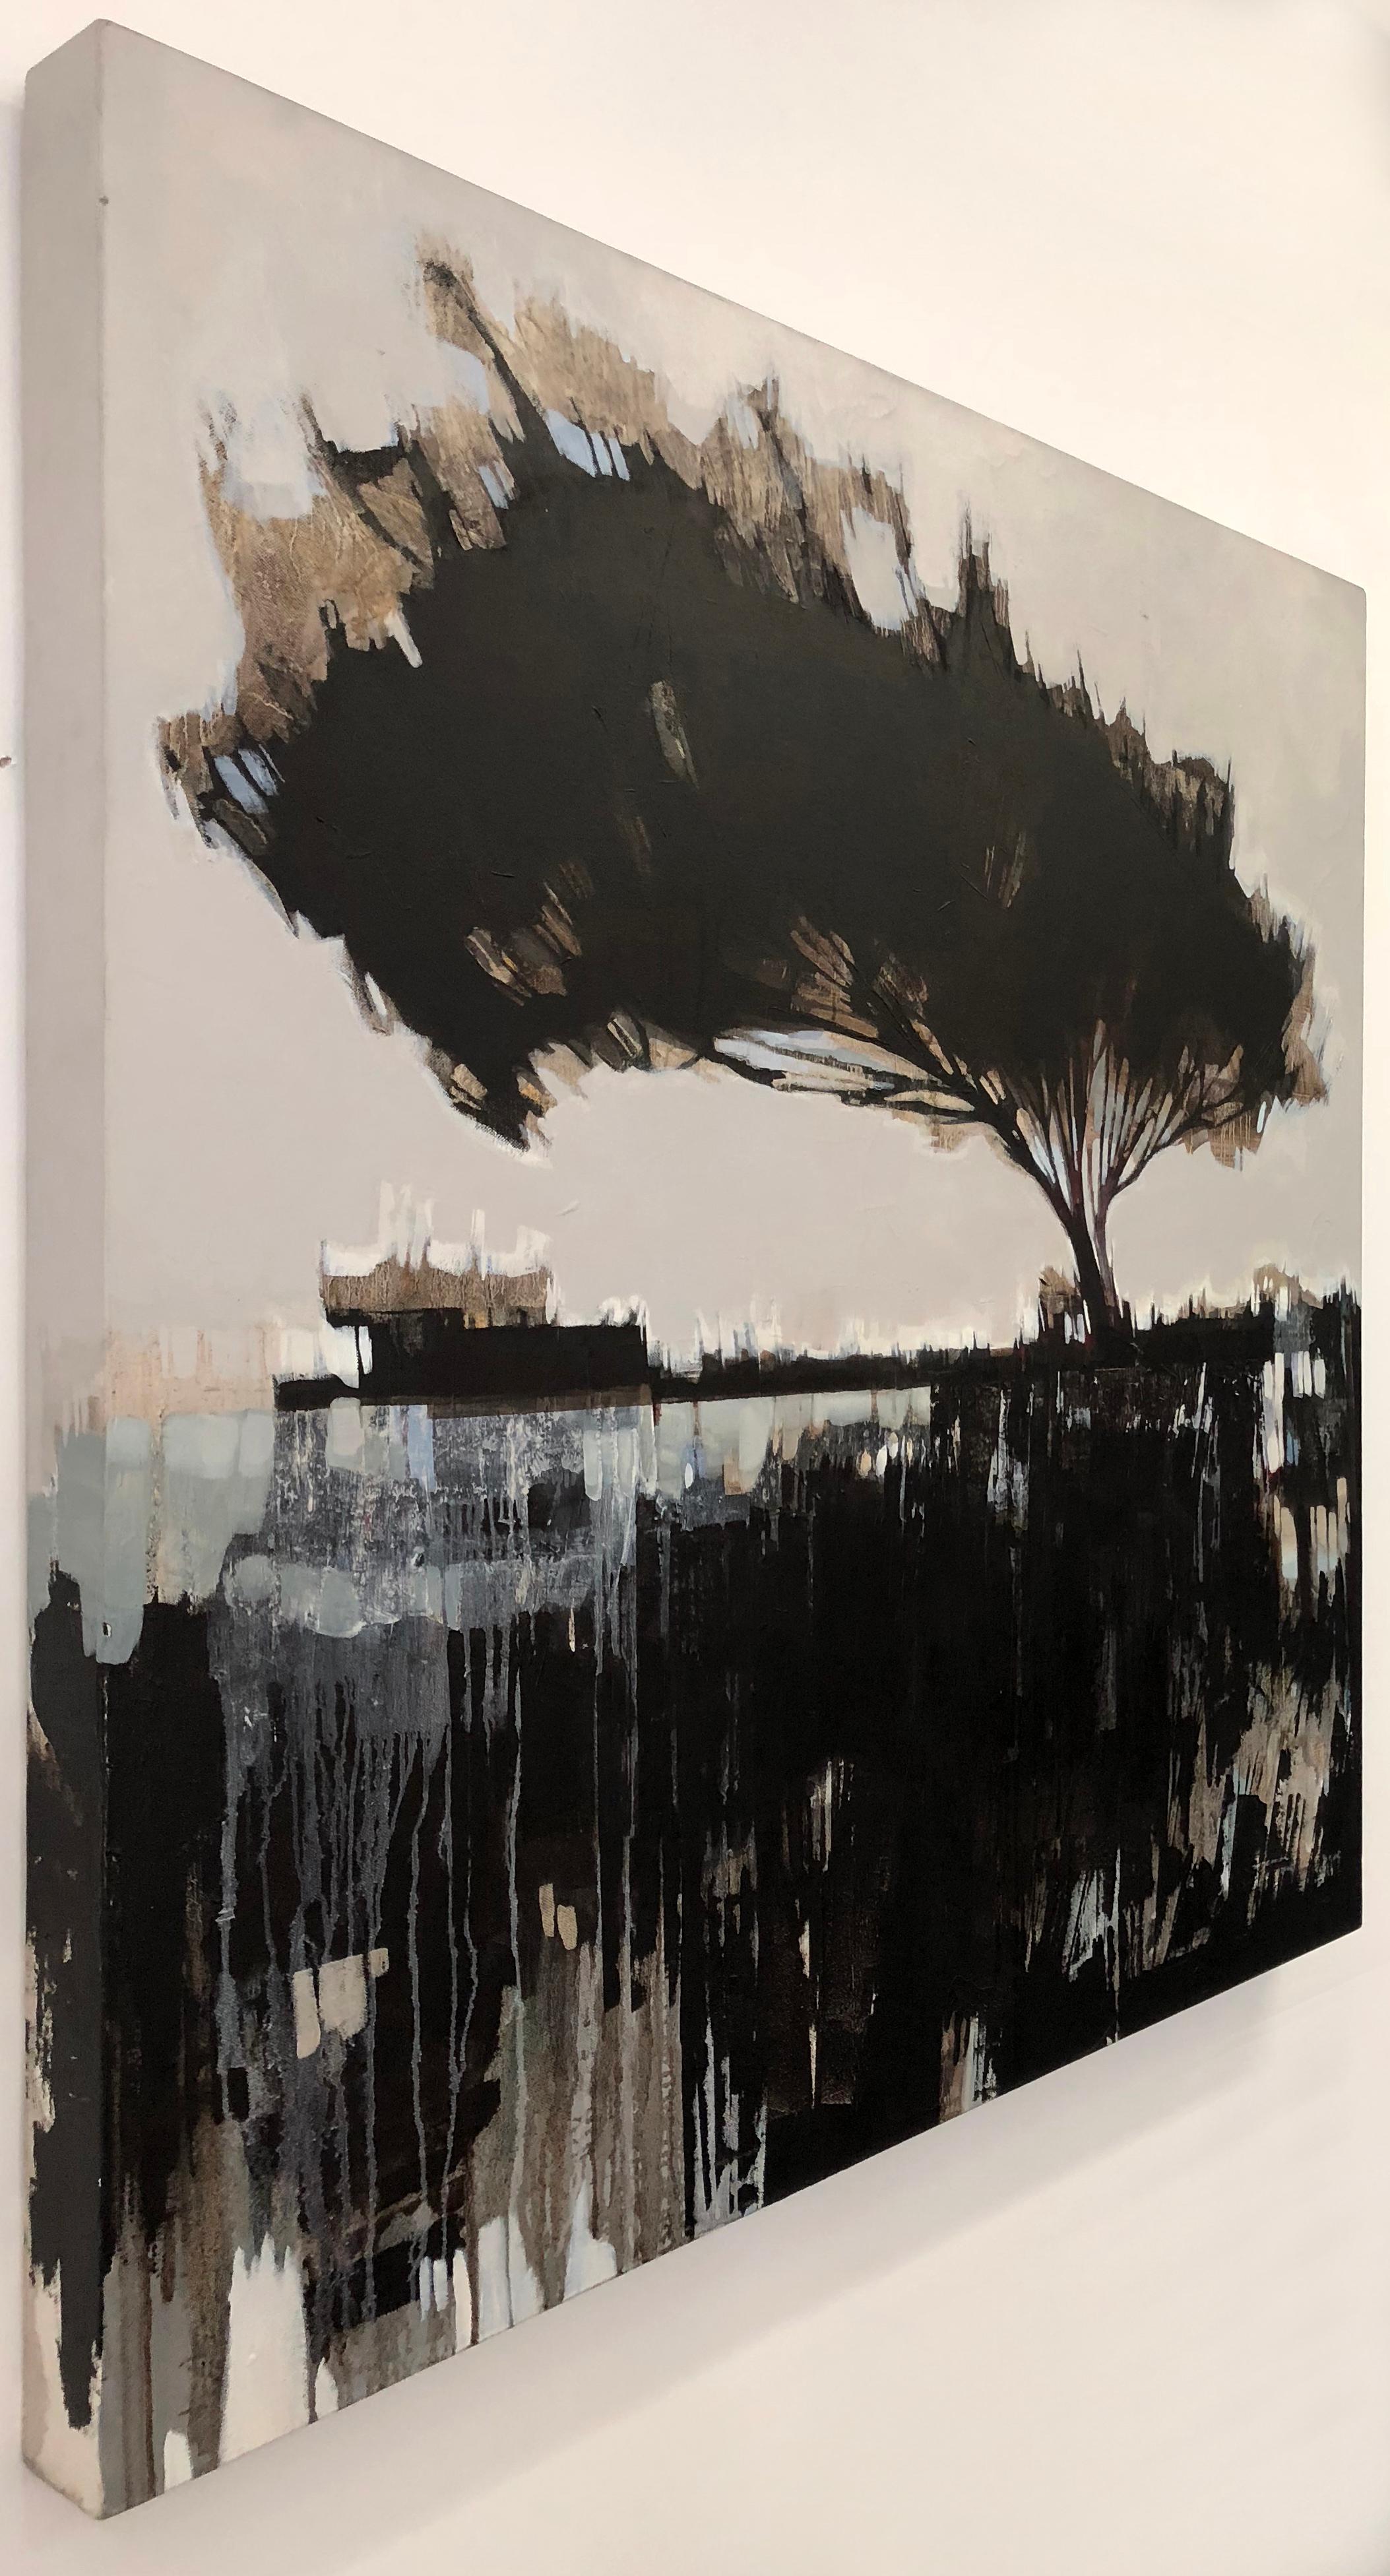 Terranova, abstract tree landscape painting, contemporary oil on canvas - Painting by Maria Jose Concha